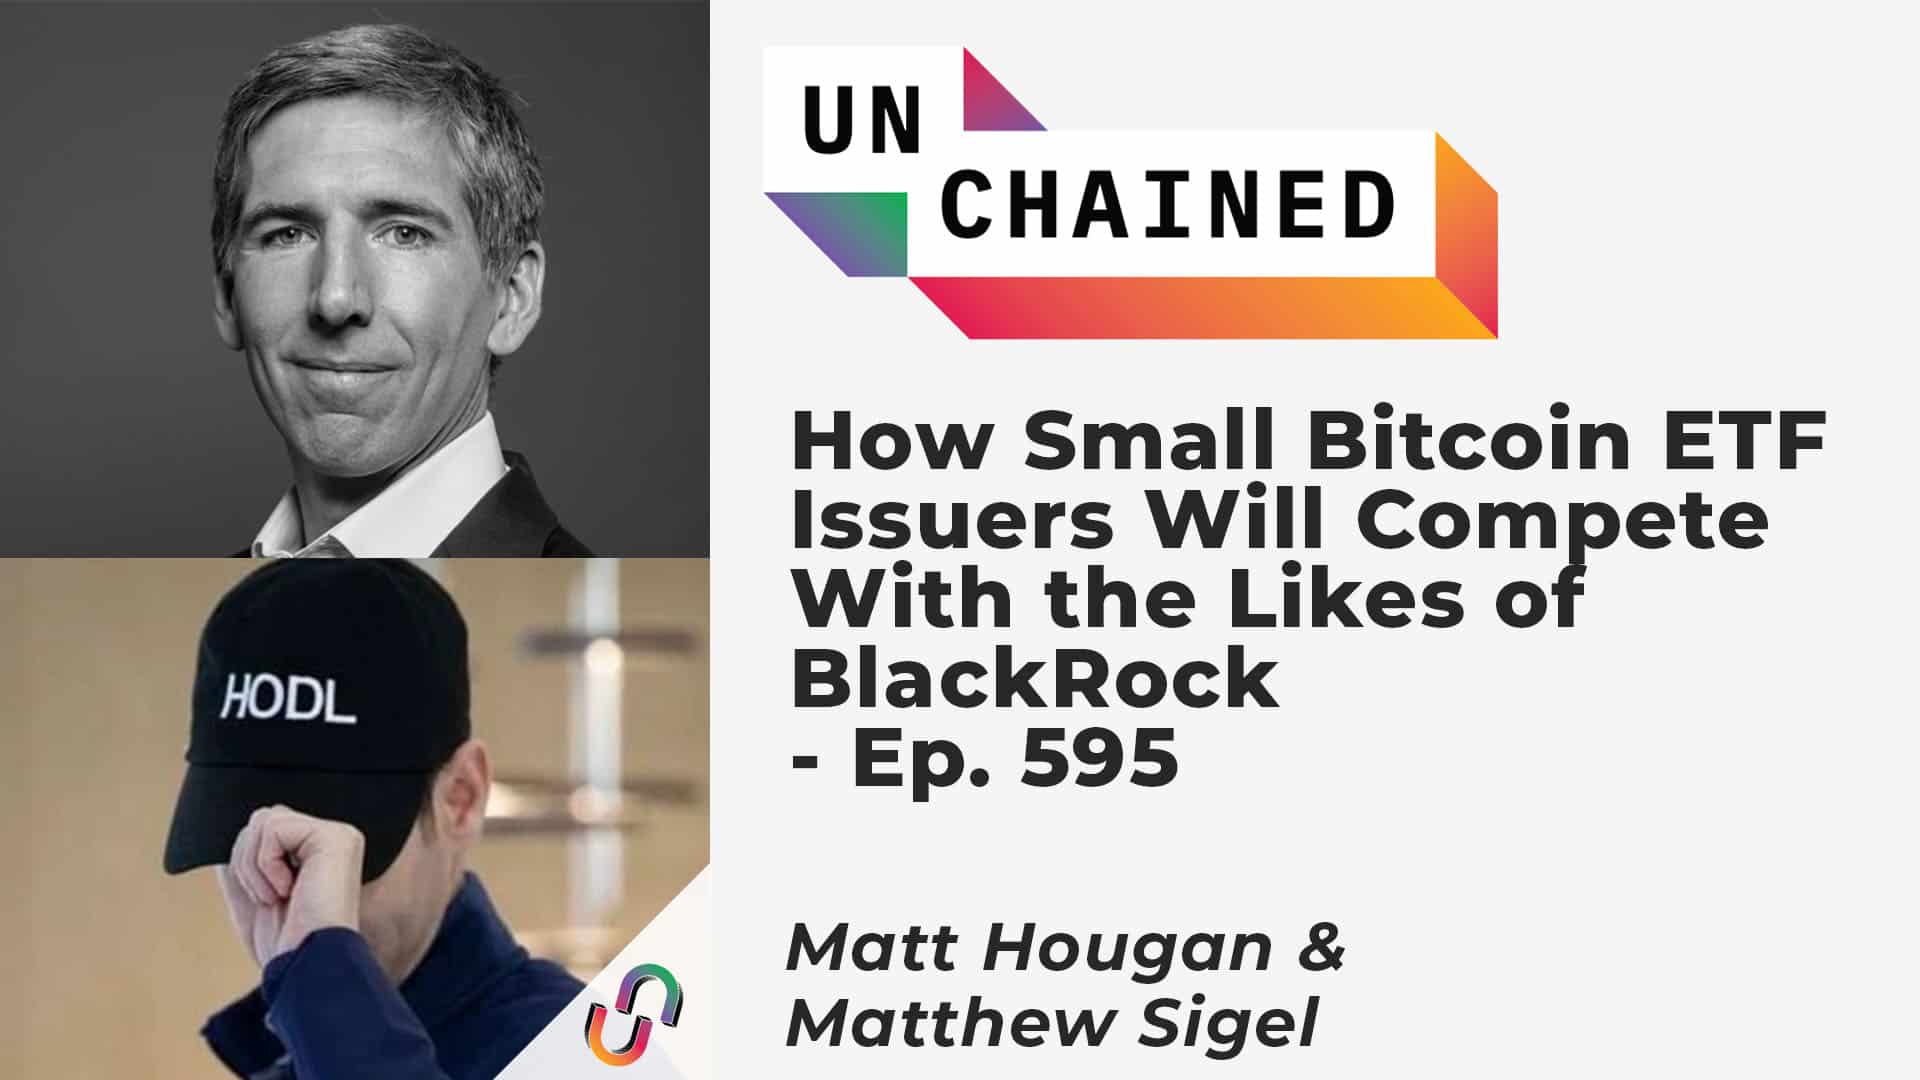 How Small Bitcoin ETF Issuers Will Compete With the Likes of BlackRock - Ep. 595